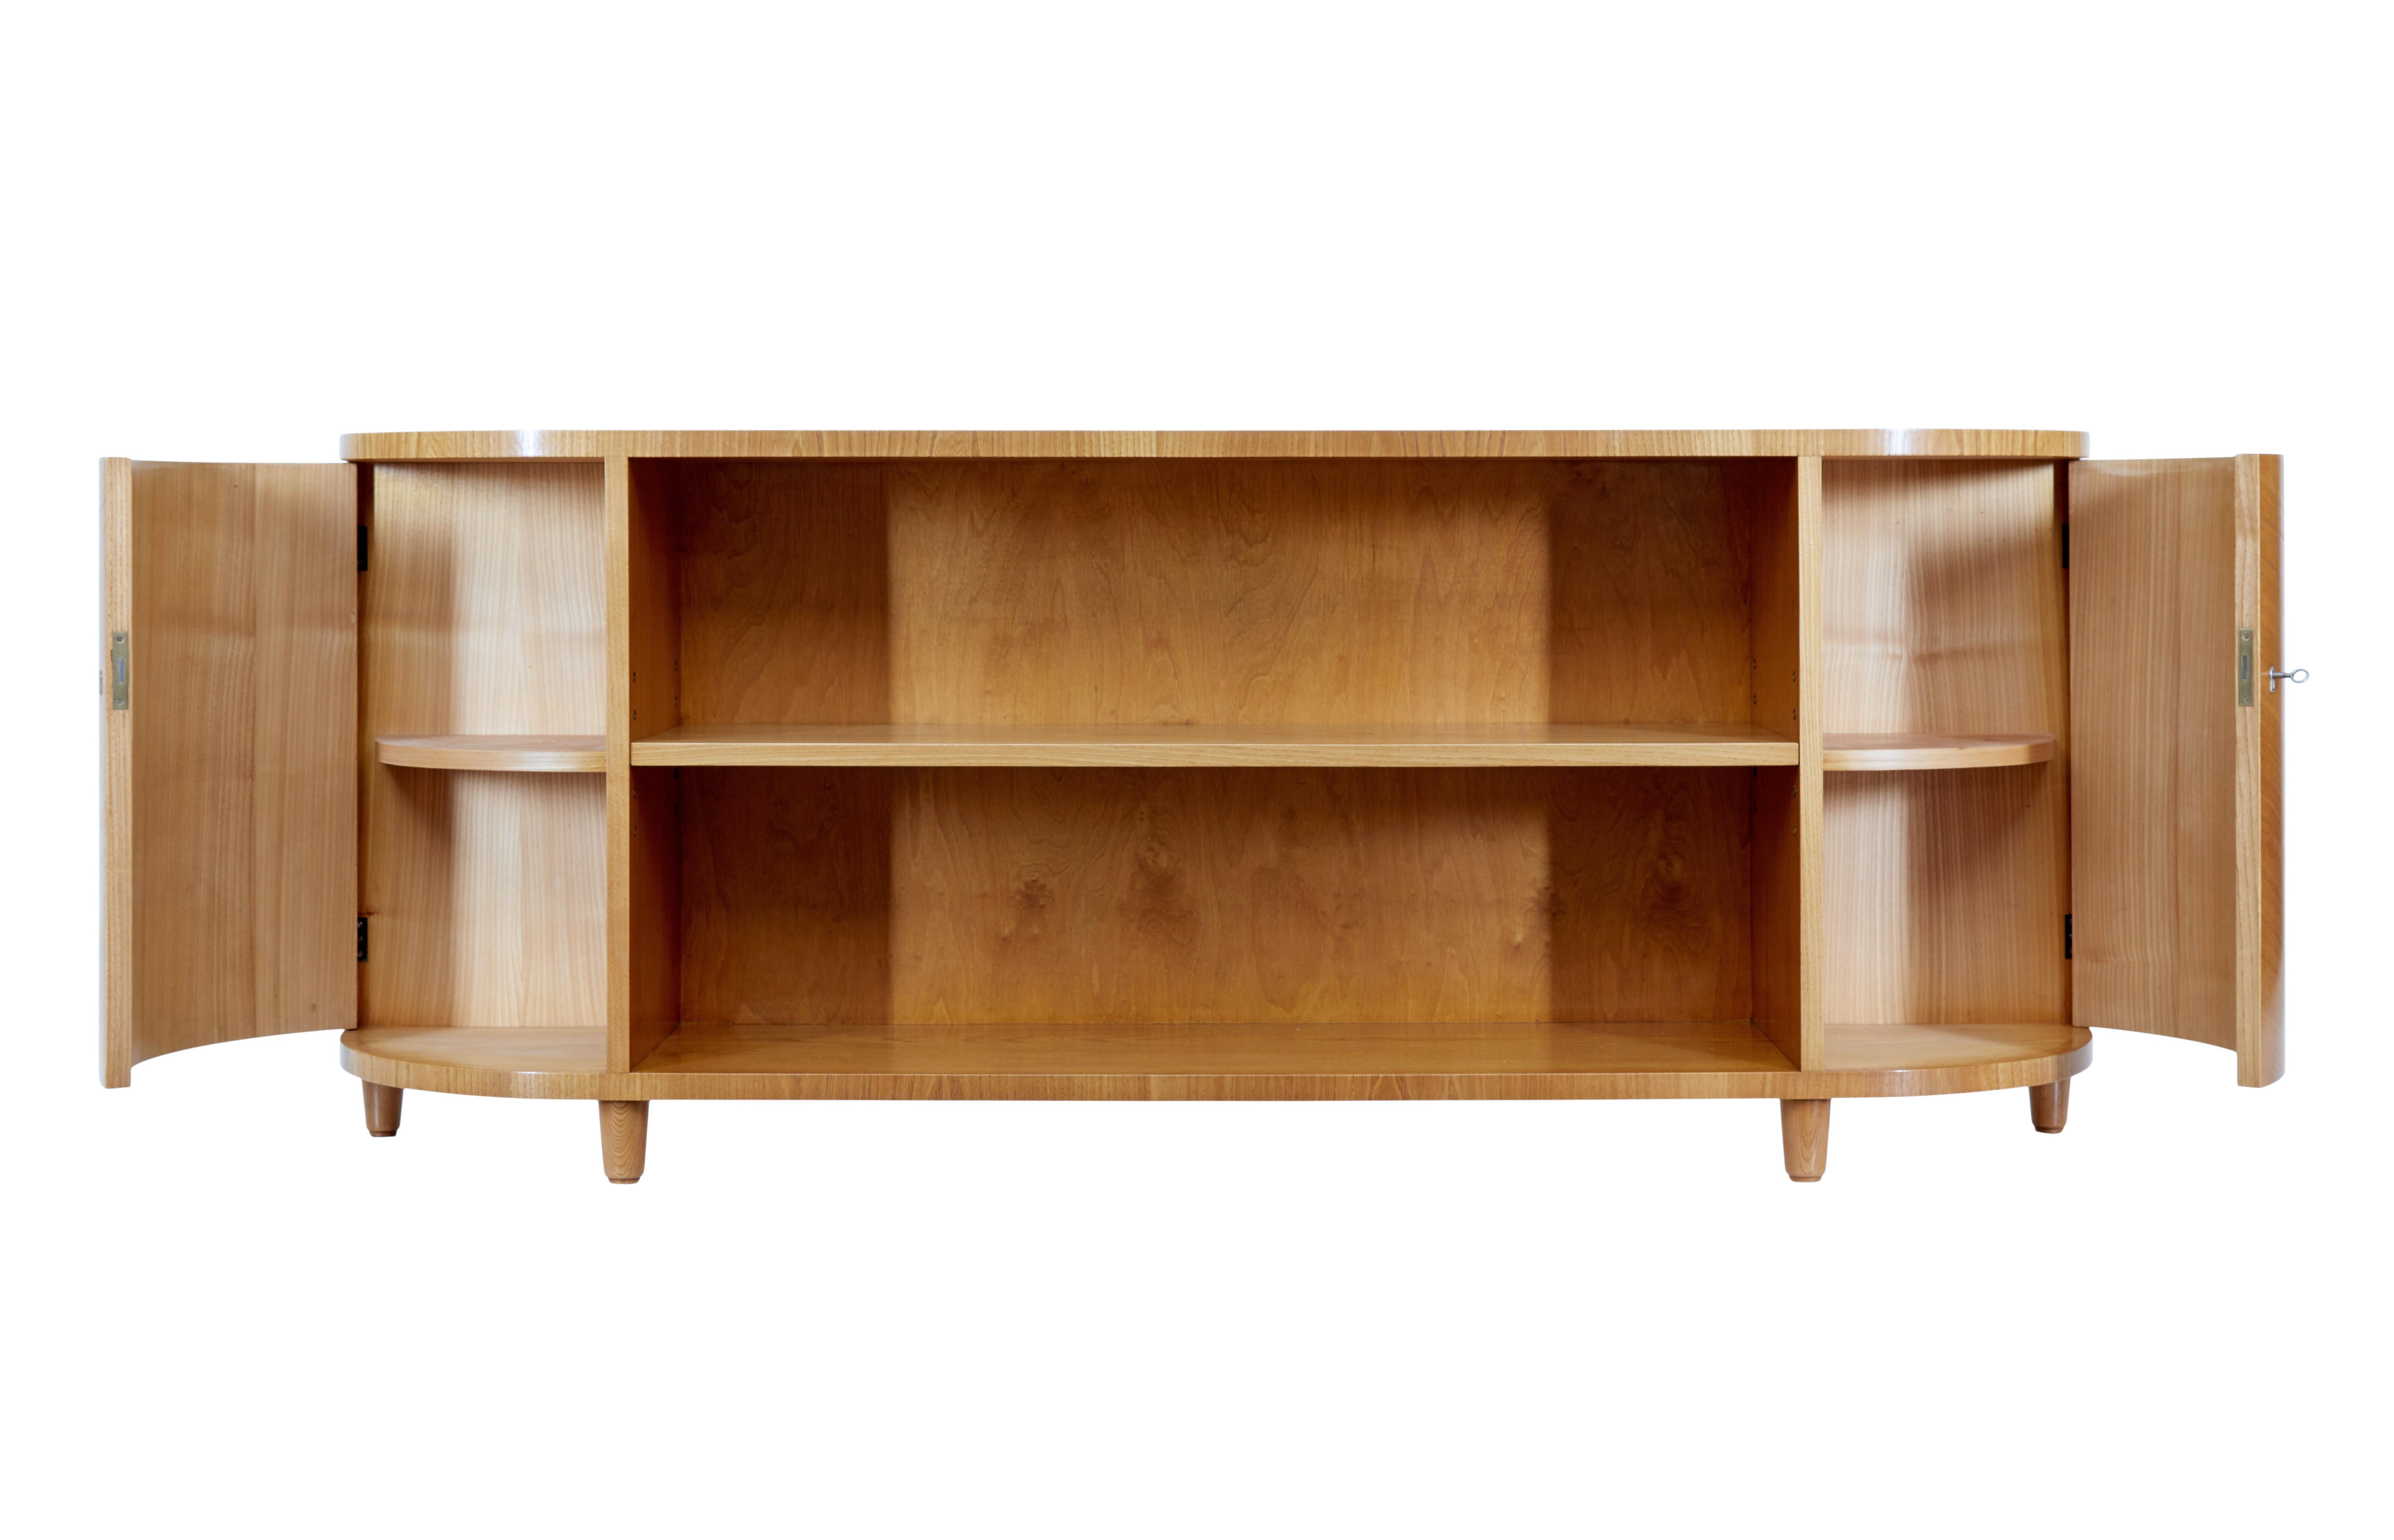 Swedish mid 20th century elm low open bookcase circa 1950.

Fine elegant piece of mid century Swedish furniture. Central book or display adjustable shelf which is flanked either side by a shaped cupboard which opens on the key. Each cupboard